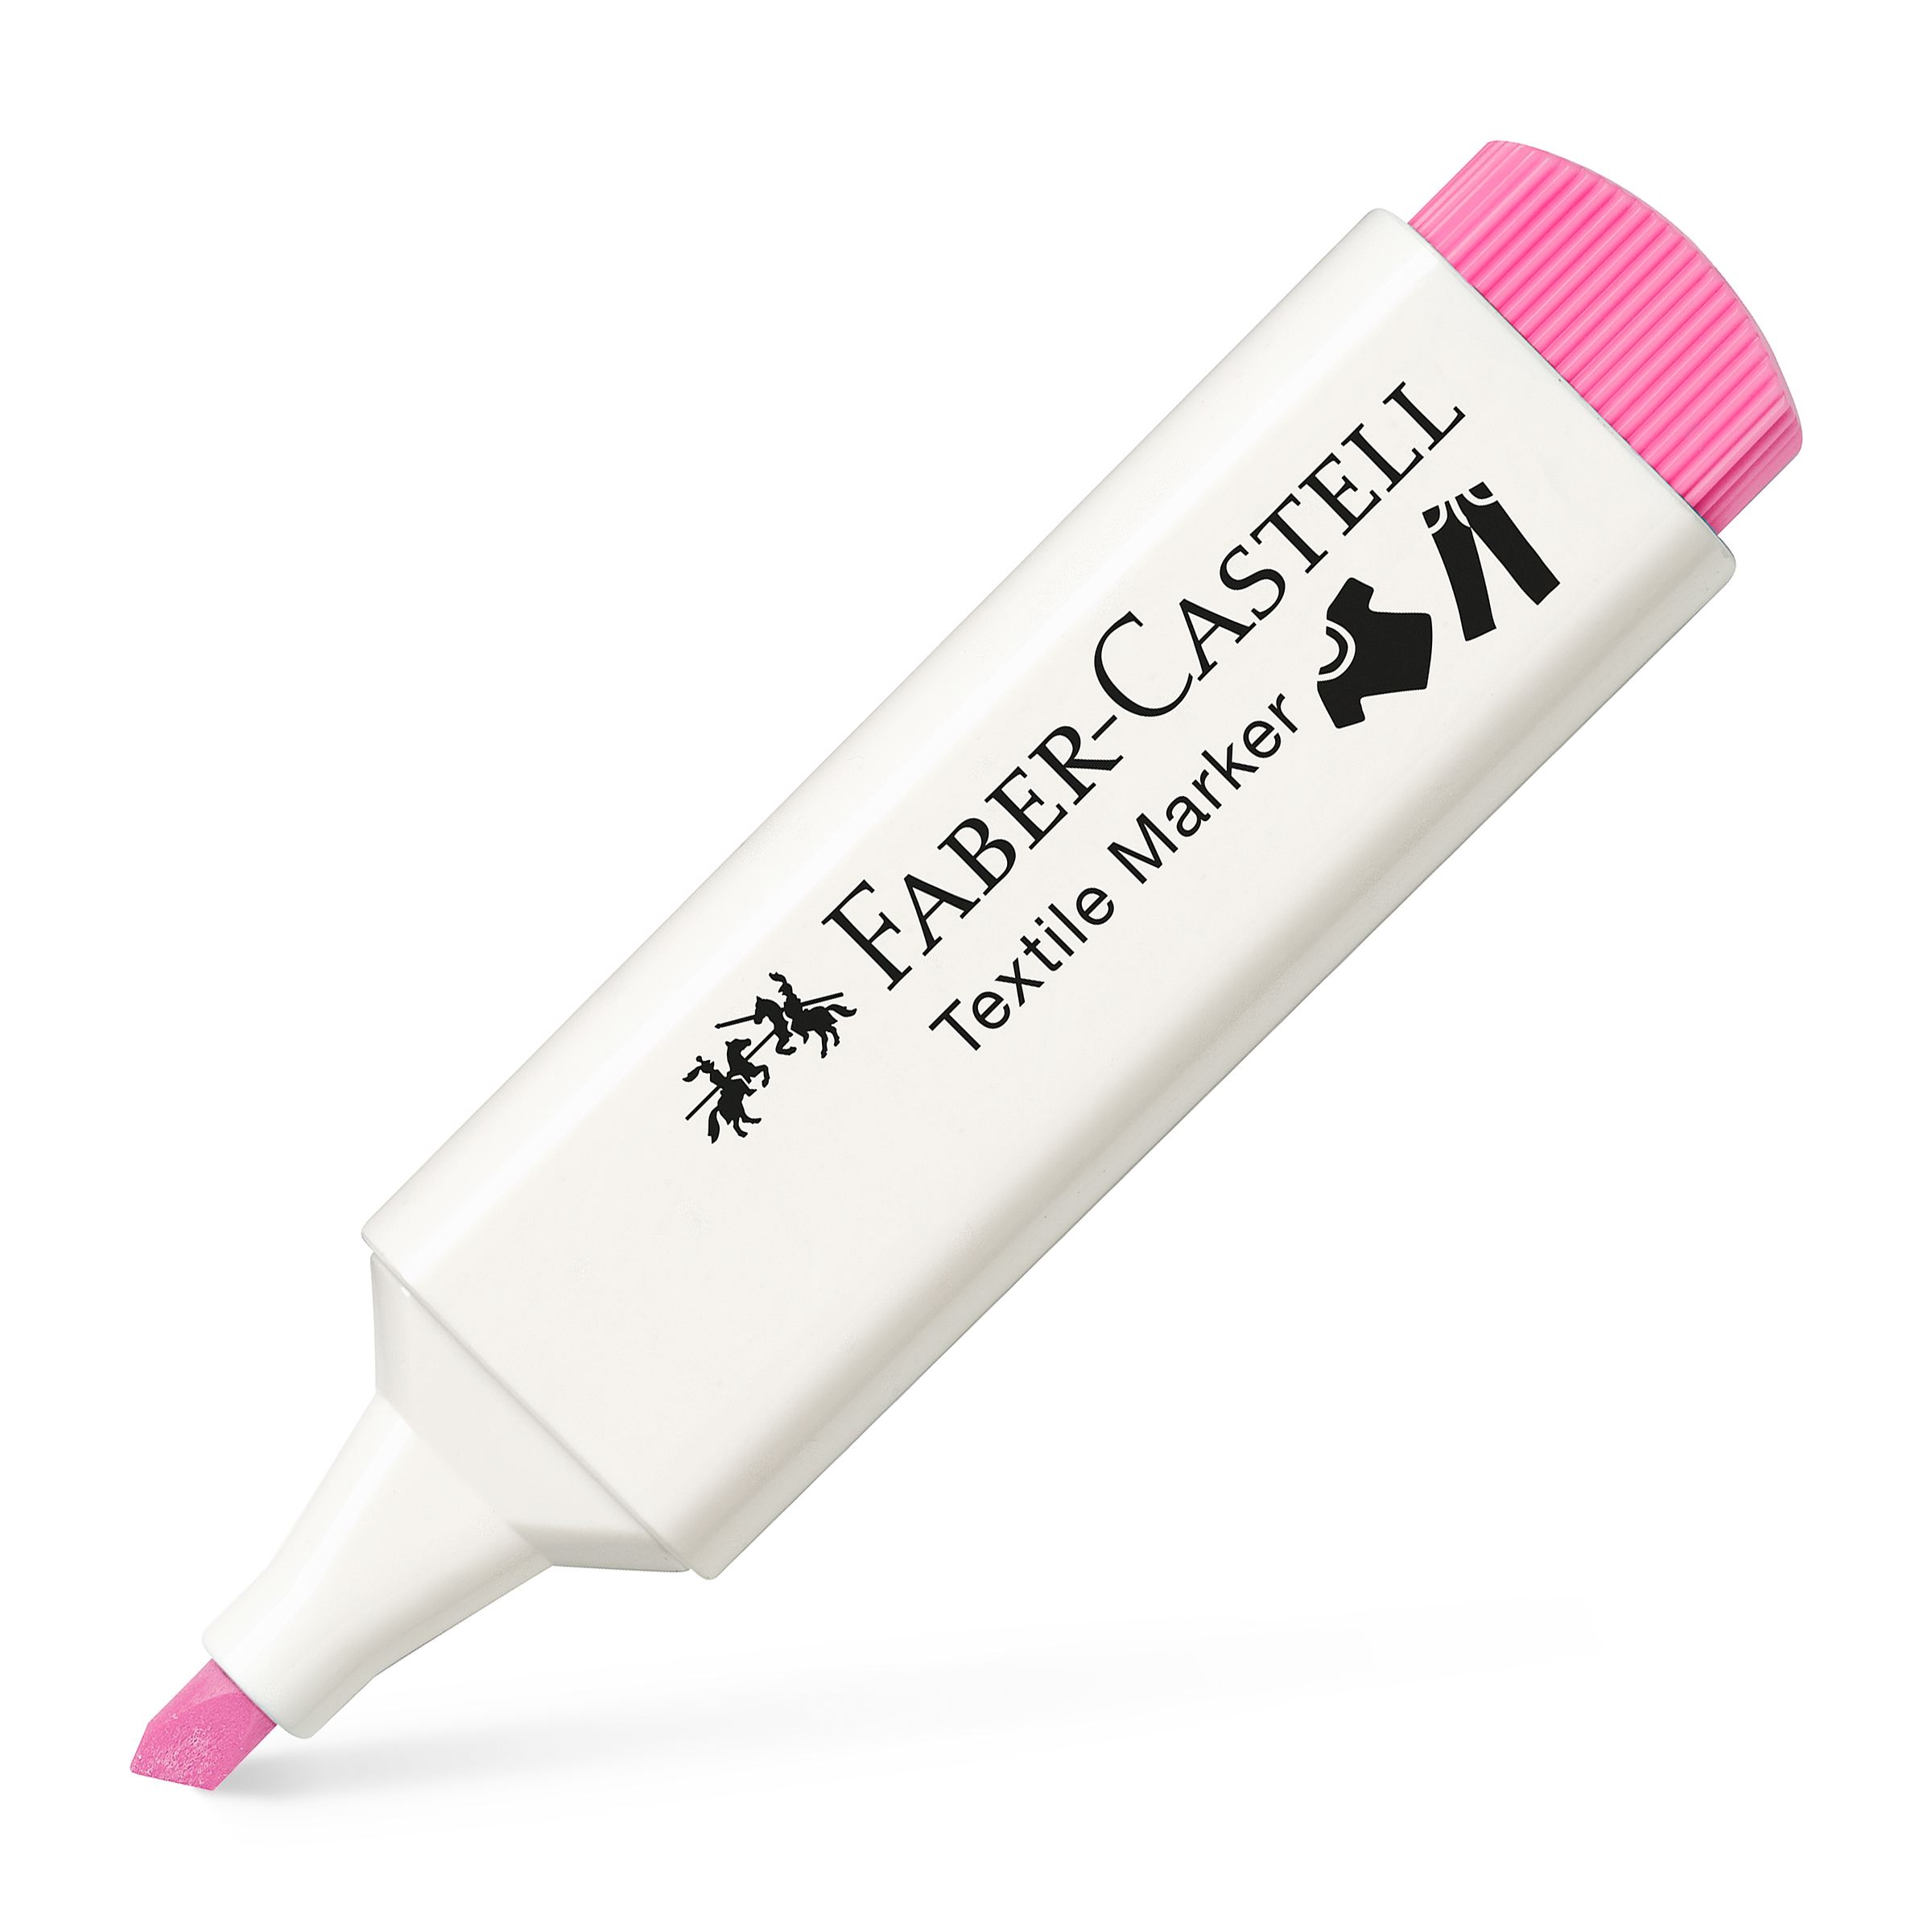 FABER-CASTELL Marqueurs textiles 1.2-5mm 159526 baby rose